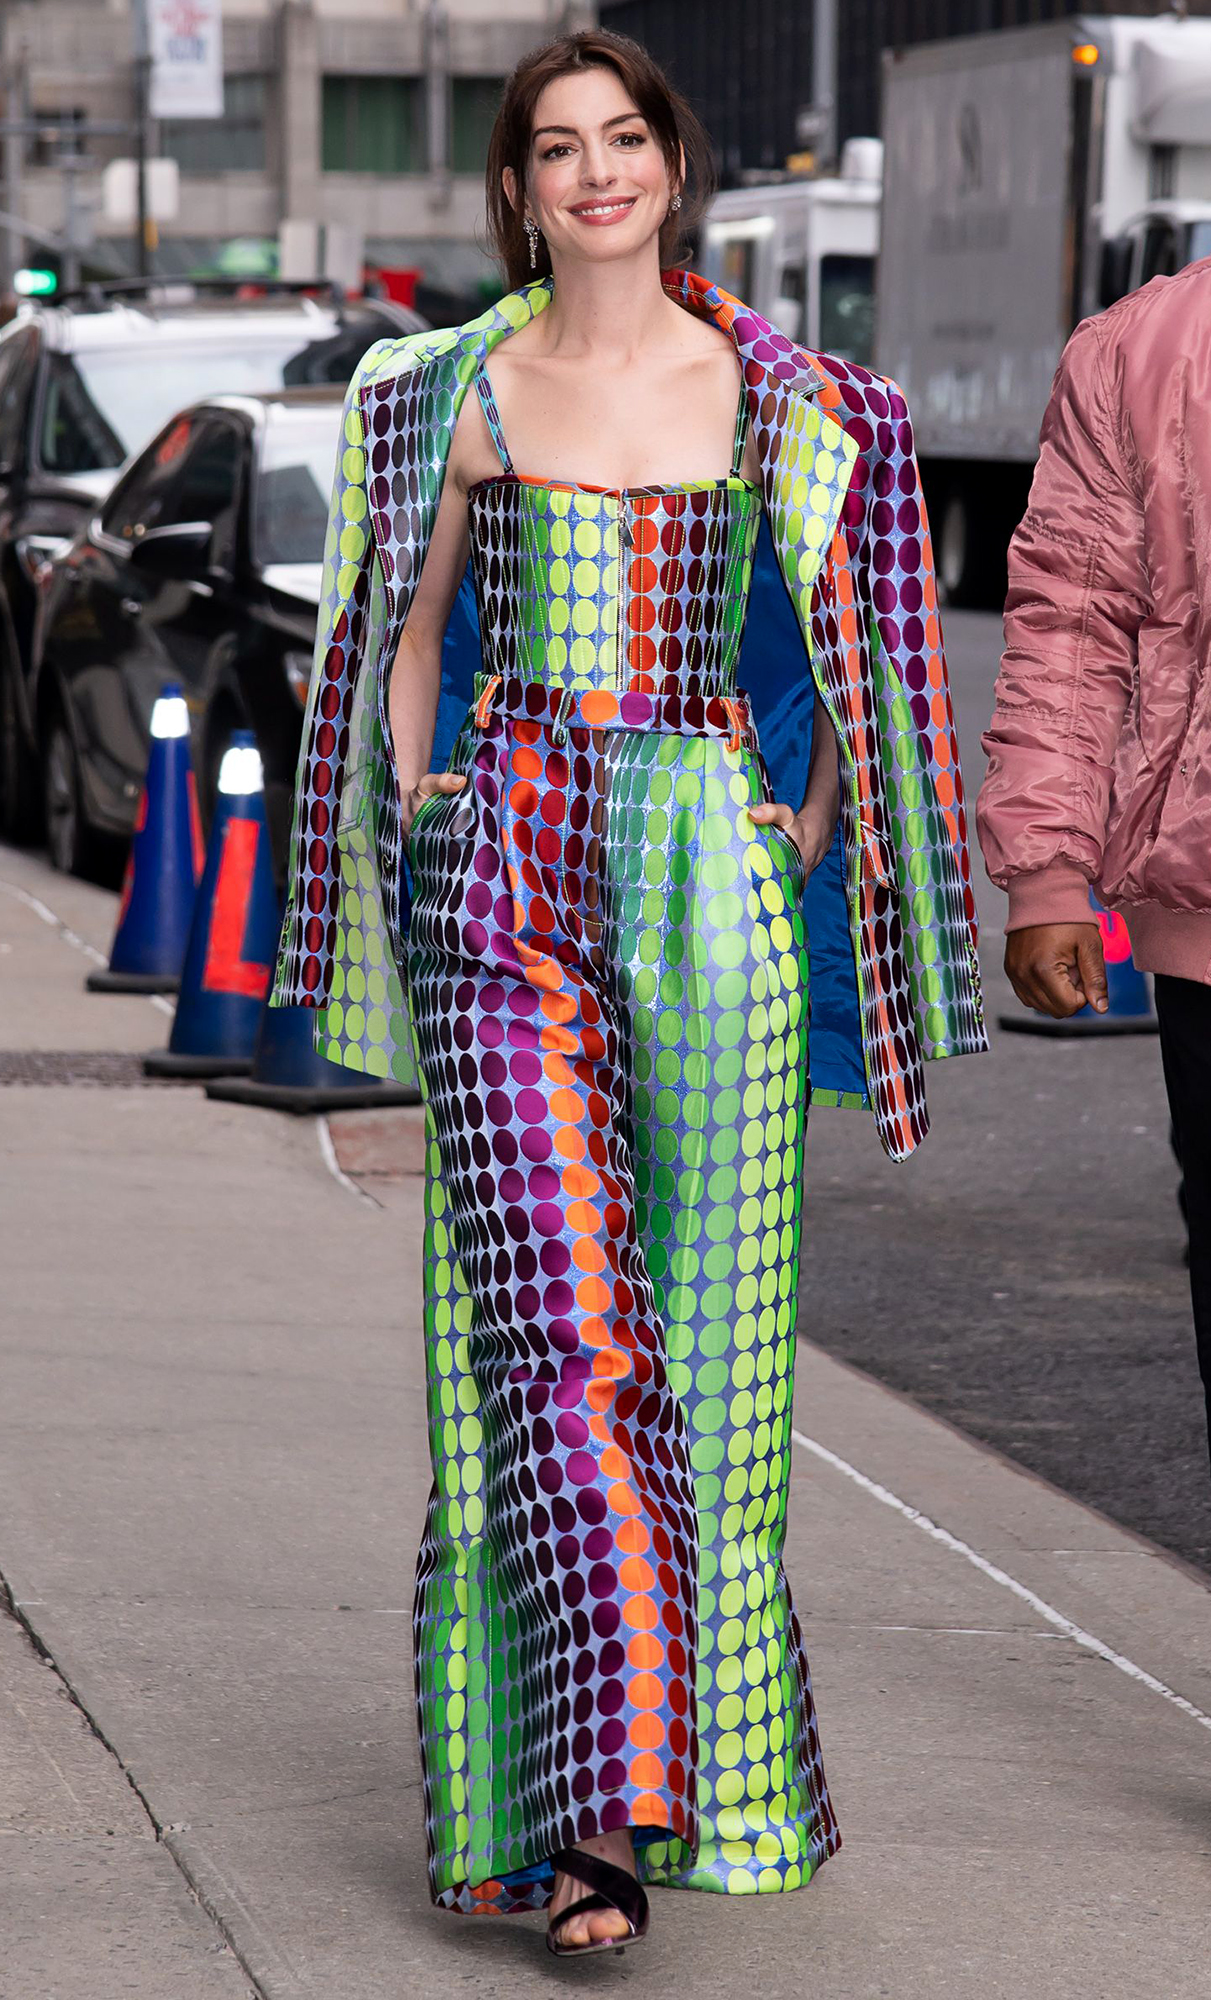 Anne Hathaway’s Eye-Popping Jumpsuit Is Giving Major Disco Vibes